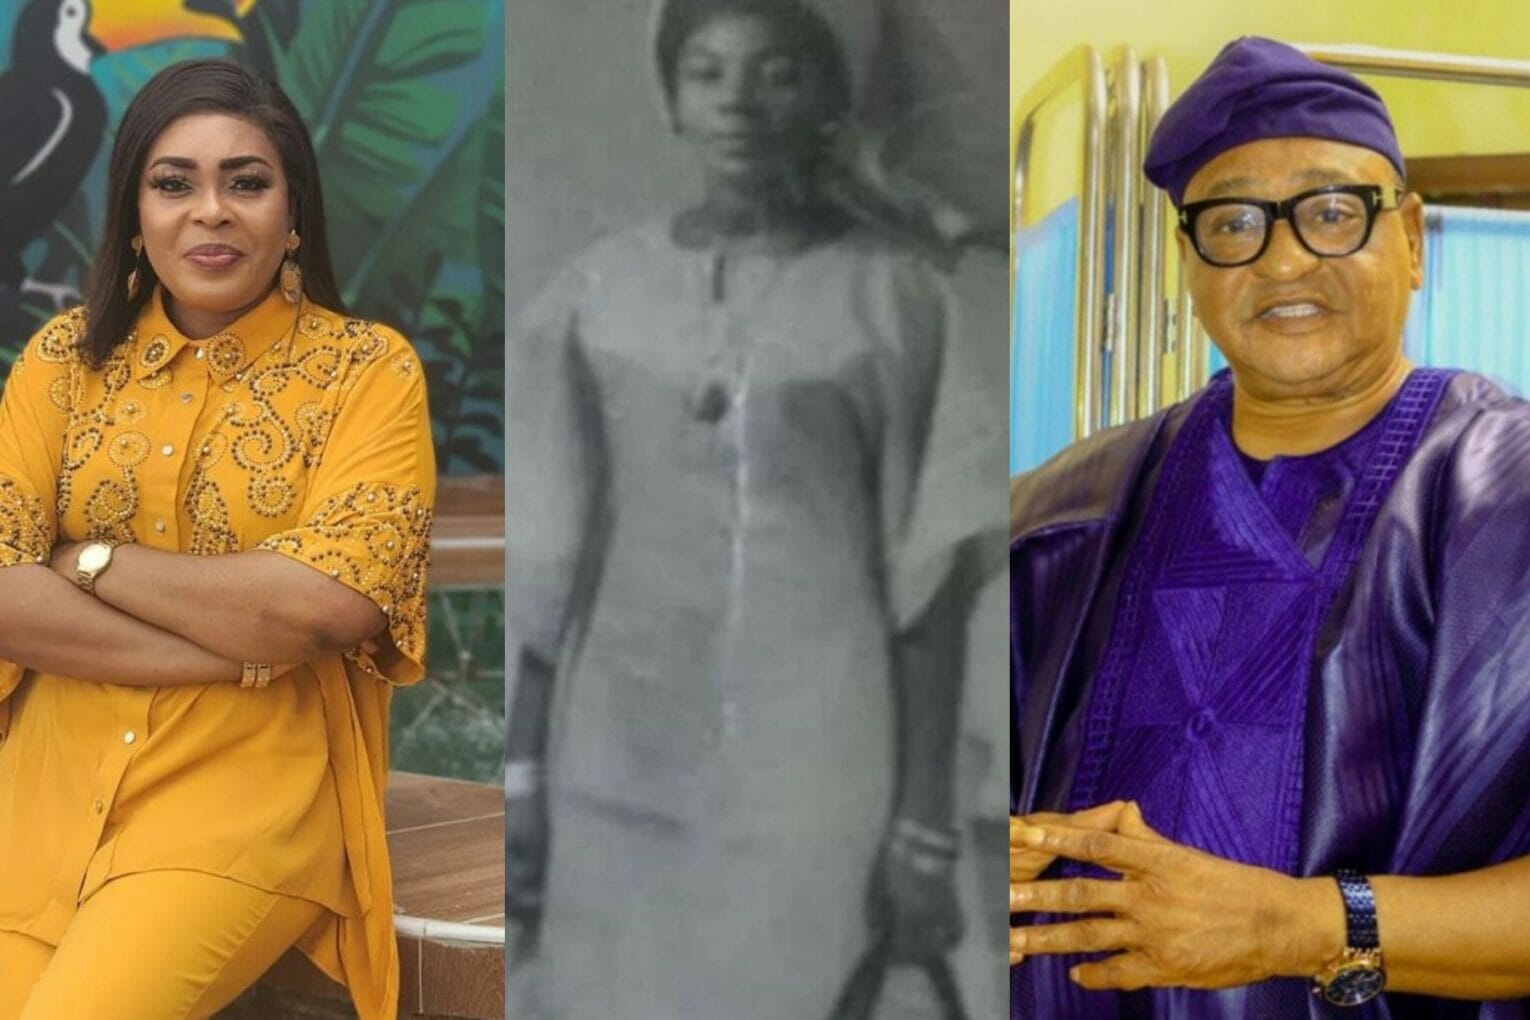 Sola Kosoko remembers late mother